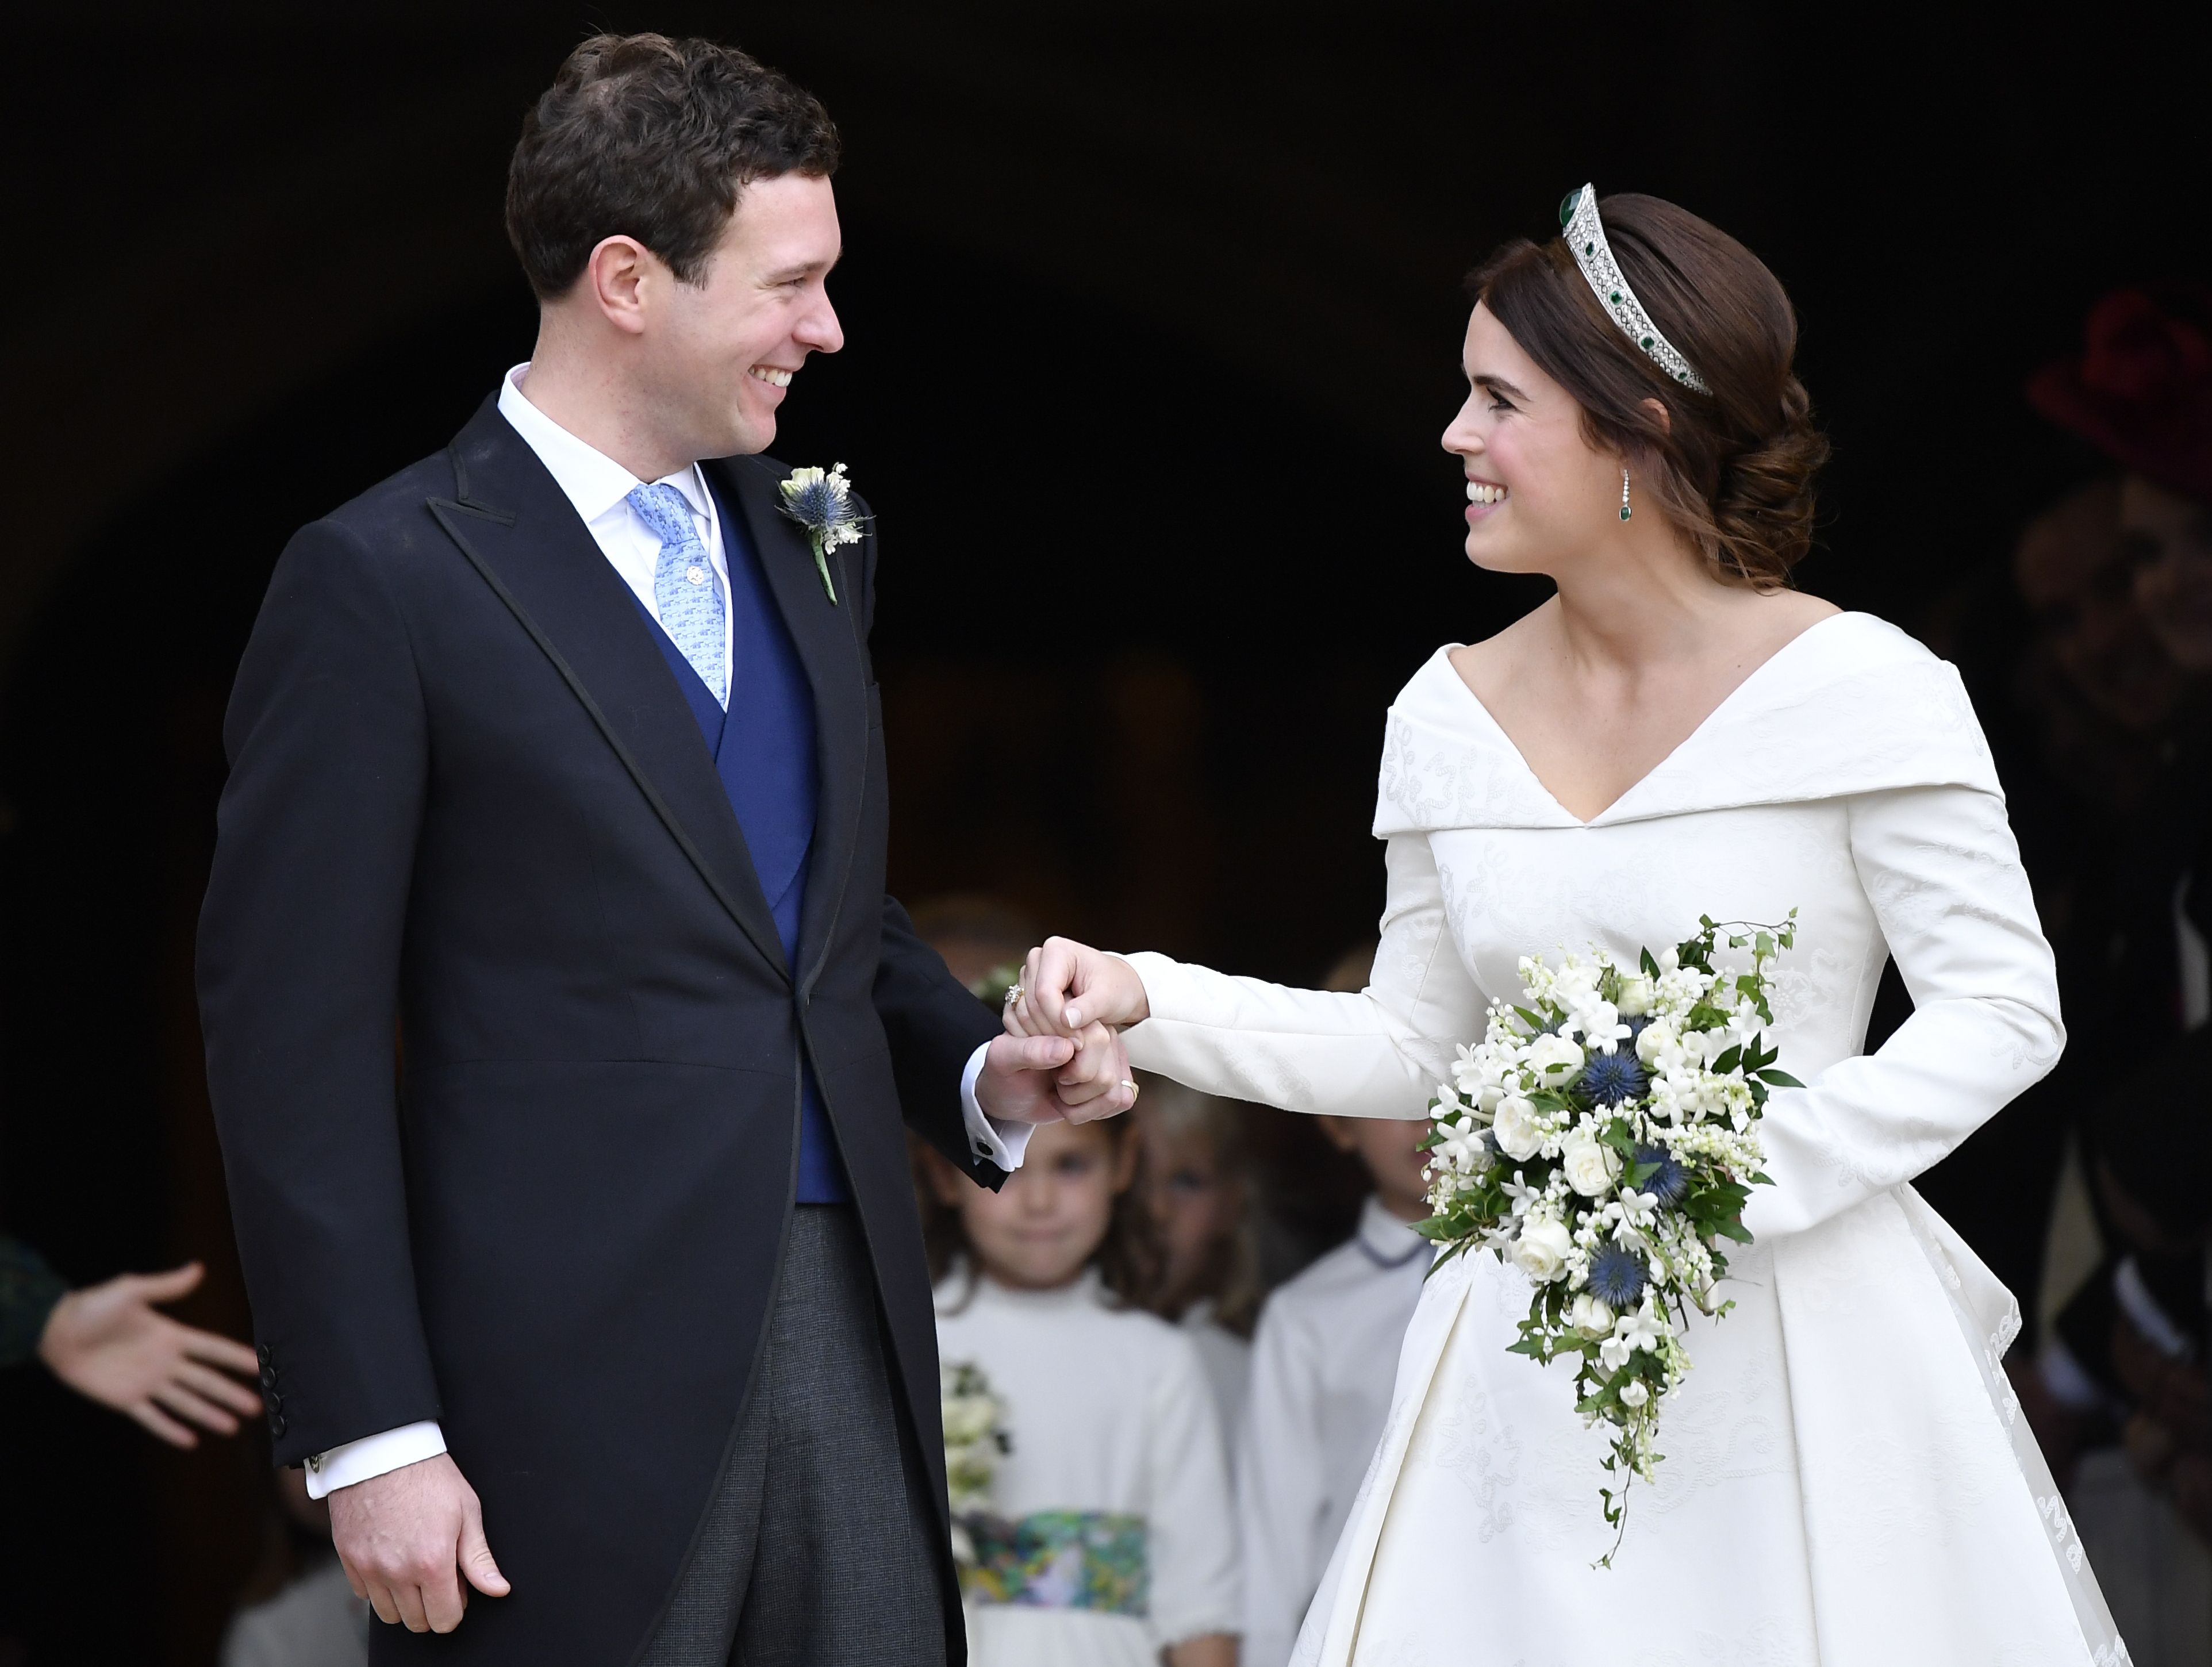 Princess Eugenie S Wedding Bouquet The Meaning Behind Princess Eugenie S Wedding Flowers